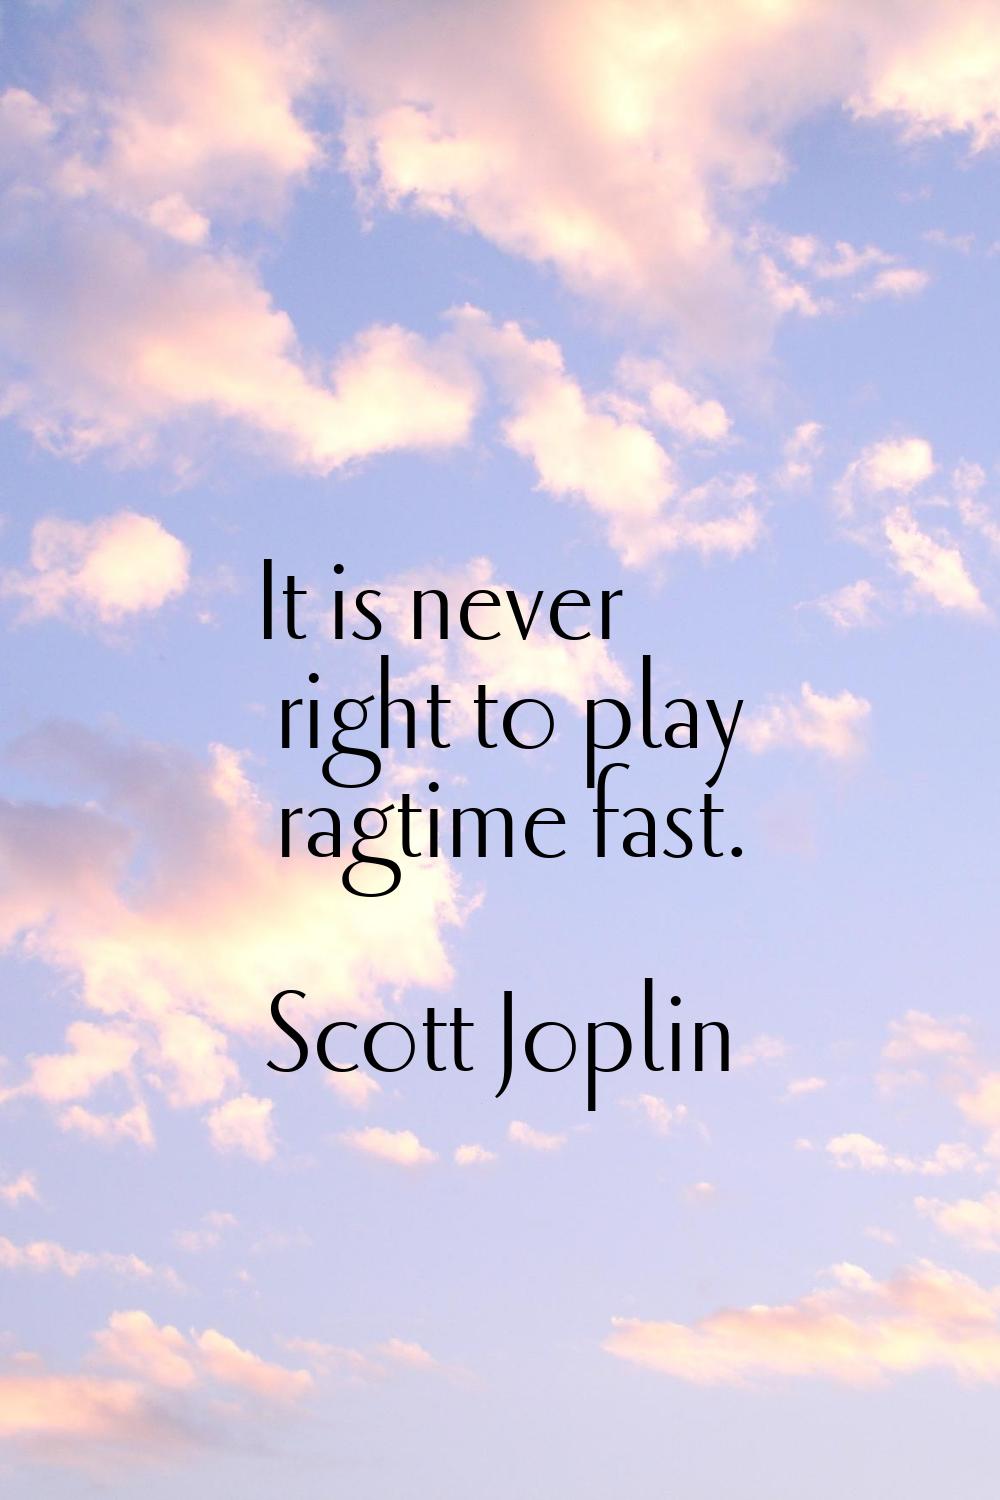 It is never right to play ragtime fast.